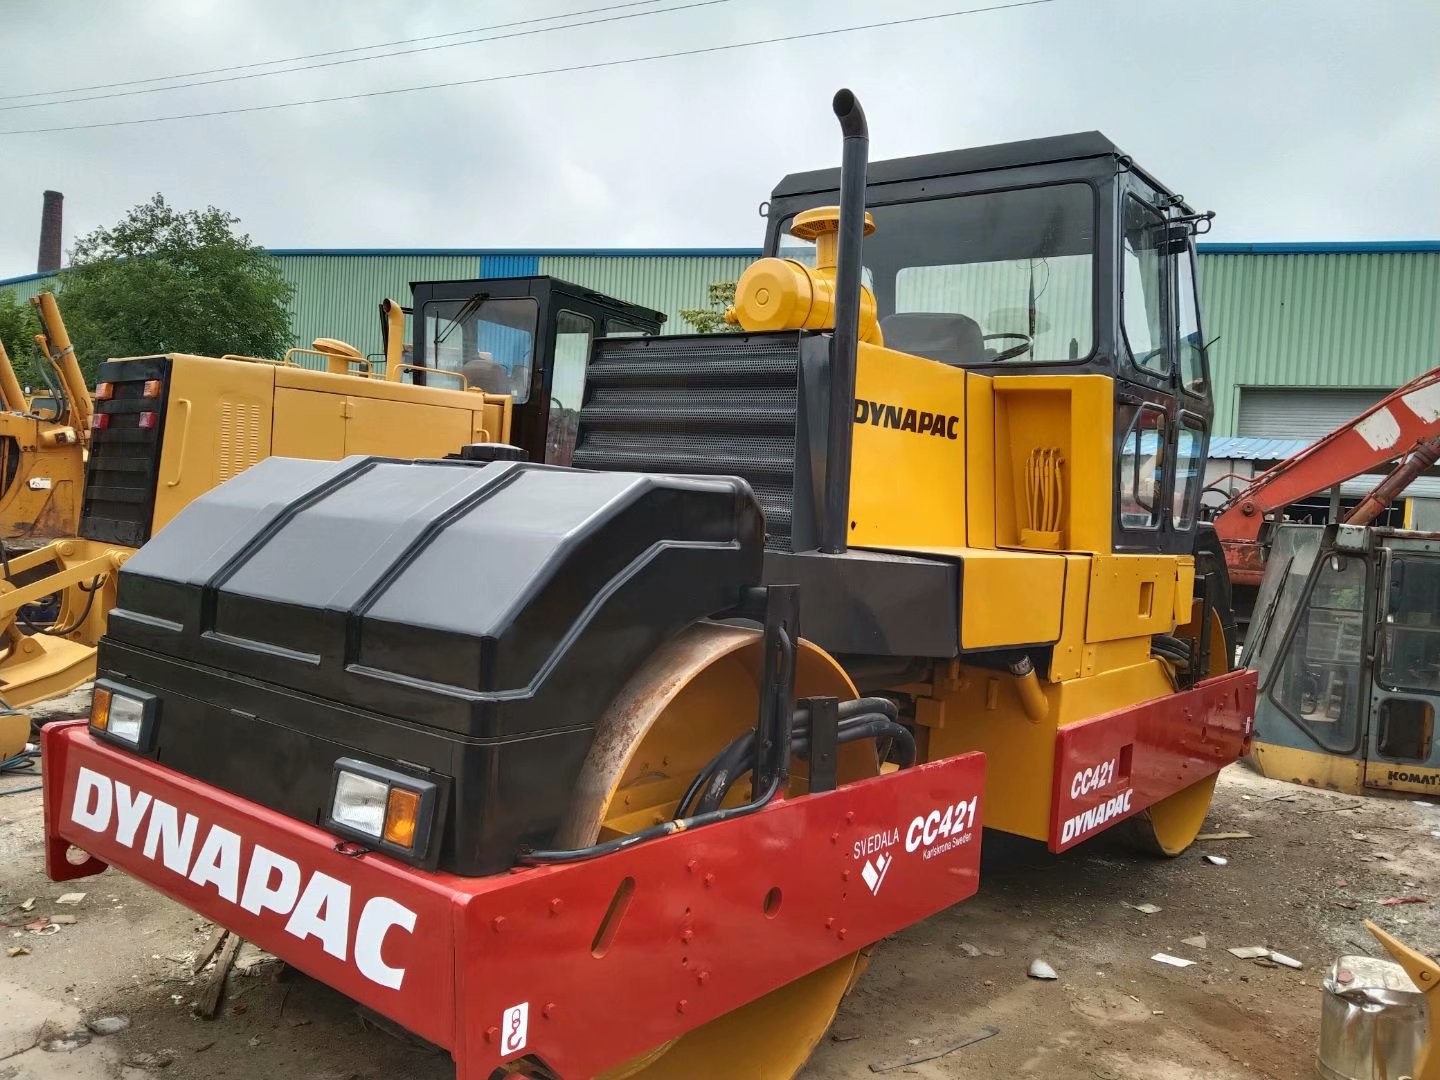 Quality Used Dynapac CC421 Douable Drum Road Roller Made in Sweden/Used Douable Drum Road Roller In Good Condition for sale